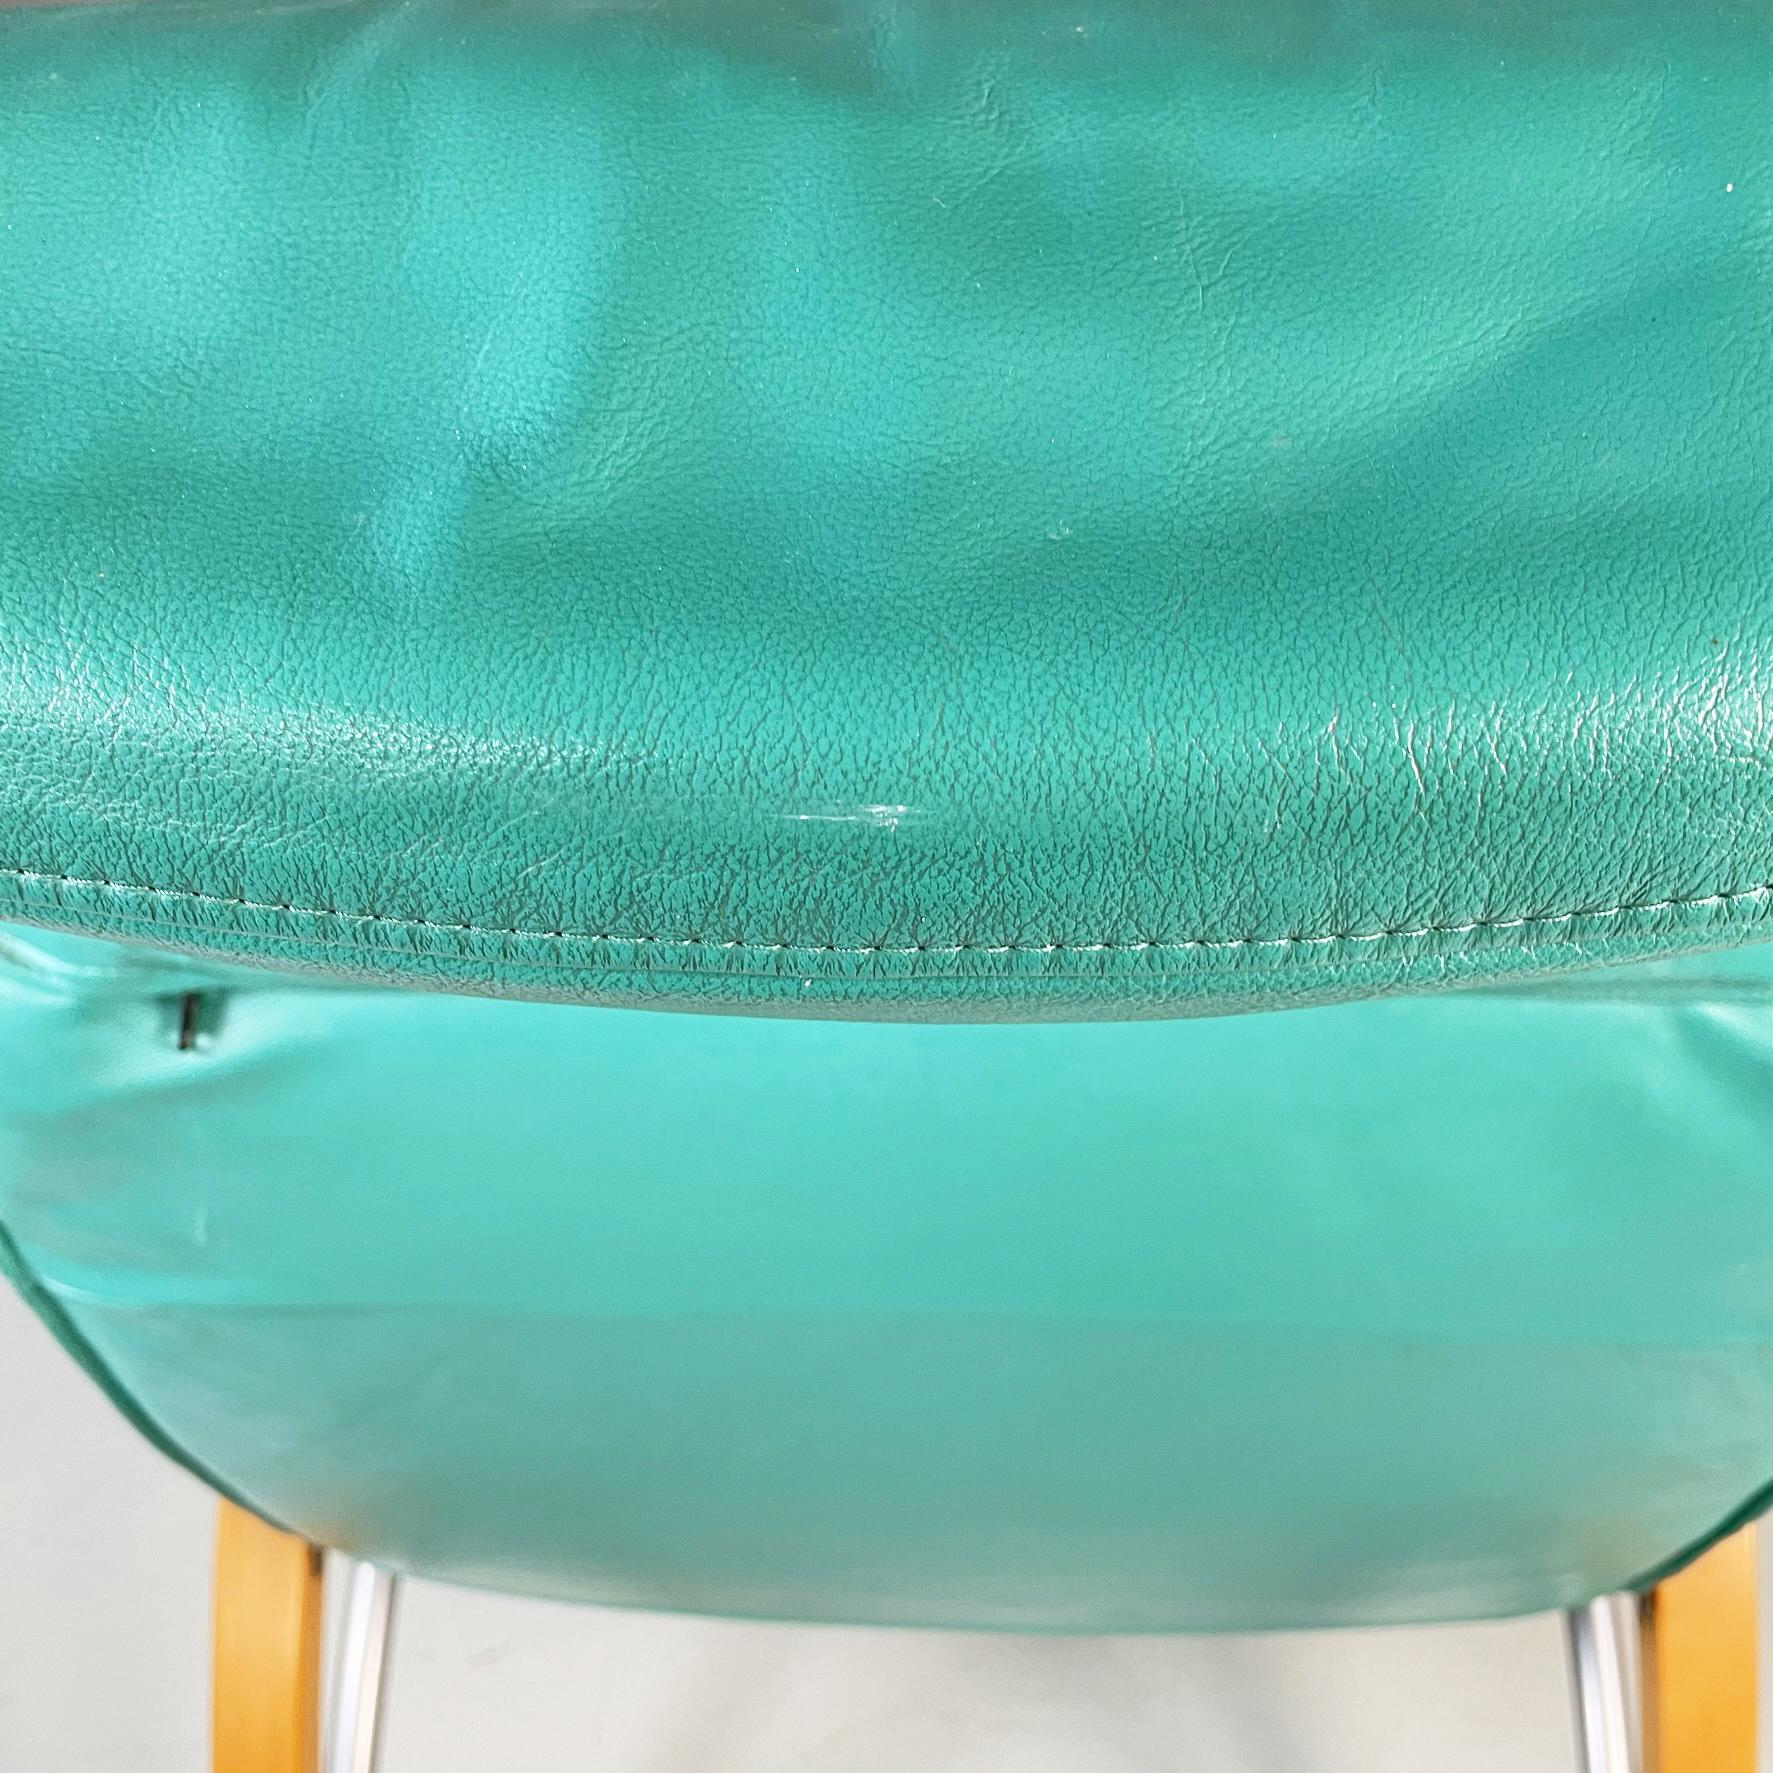 Italian Modern Armchair in Aqua-Green Leather, Wood and Metal, 1980s For Sale 13